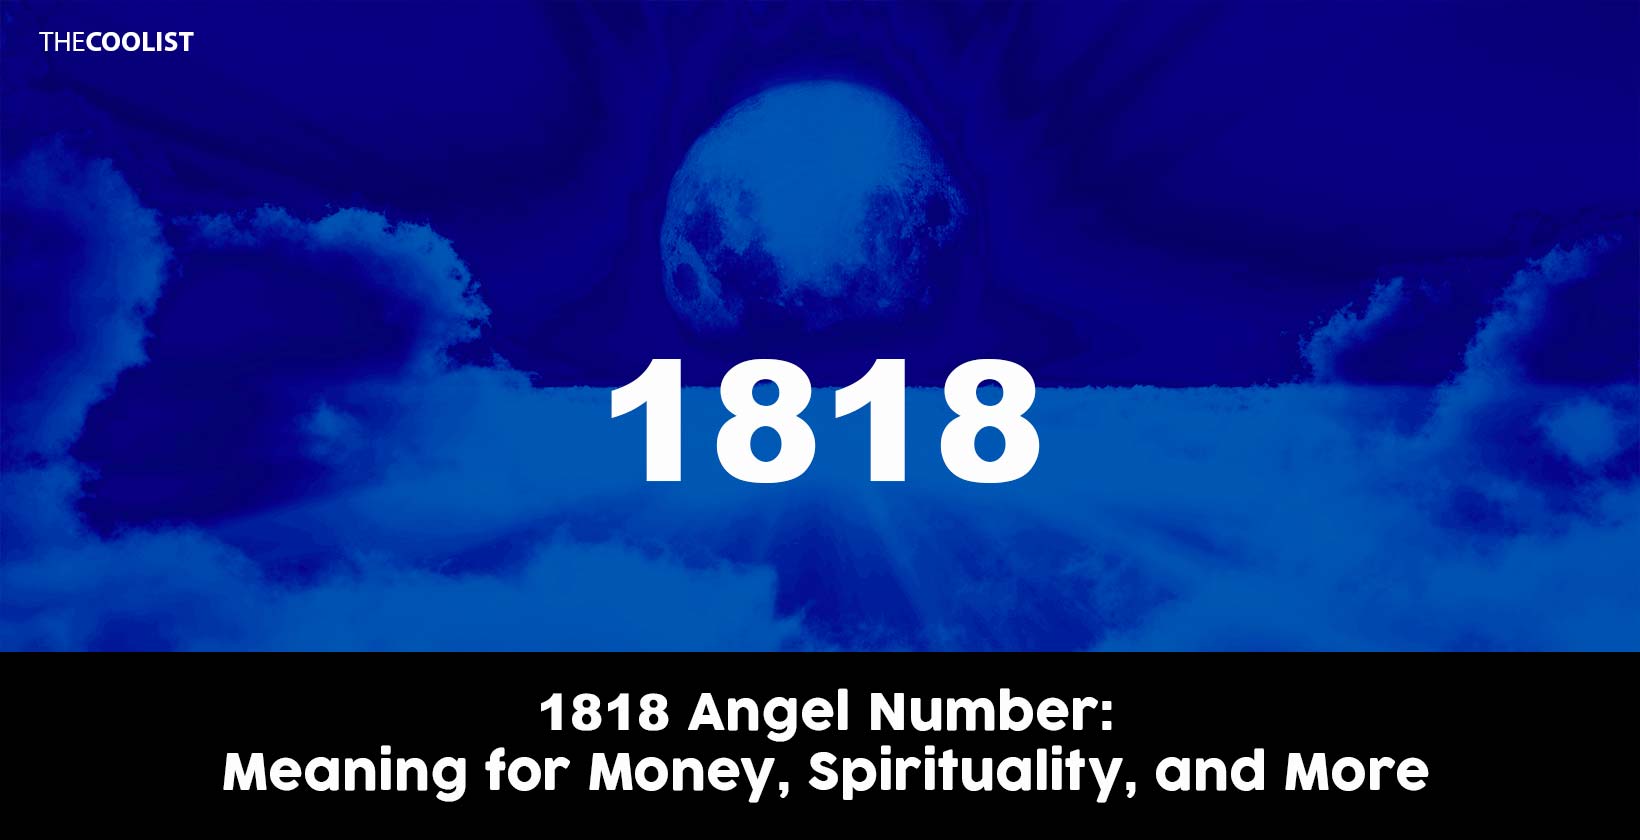 1818 Angel Number: Meaning for Money, Spirituality, and More